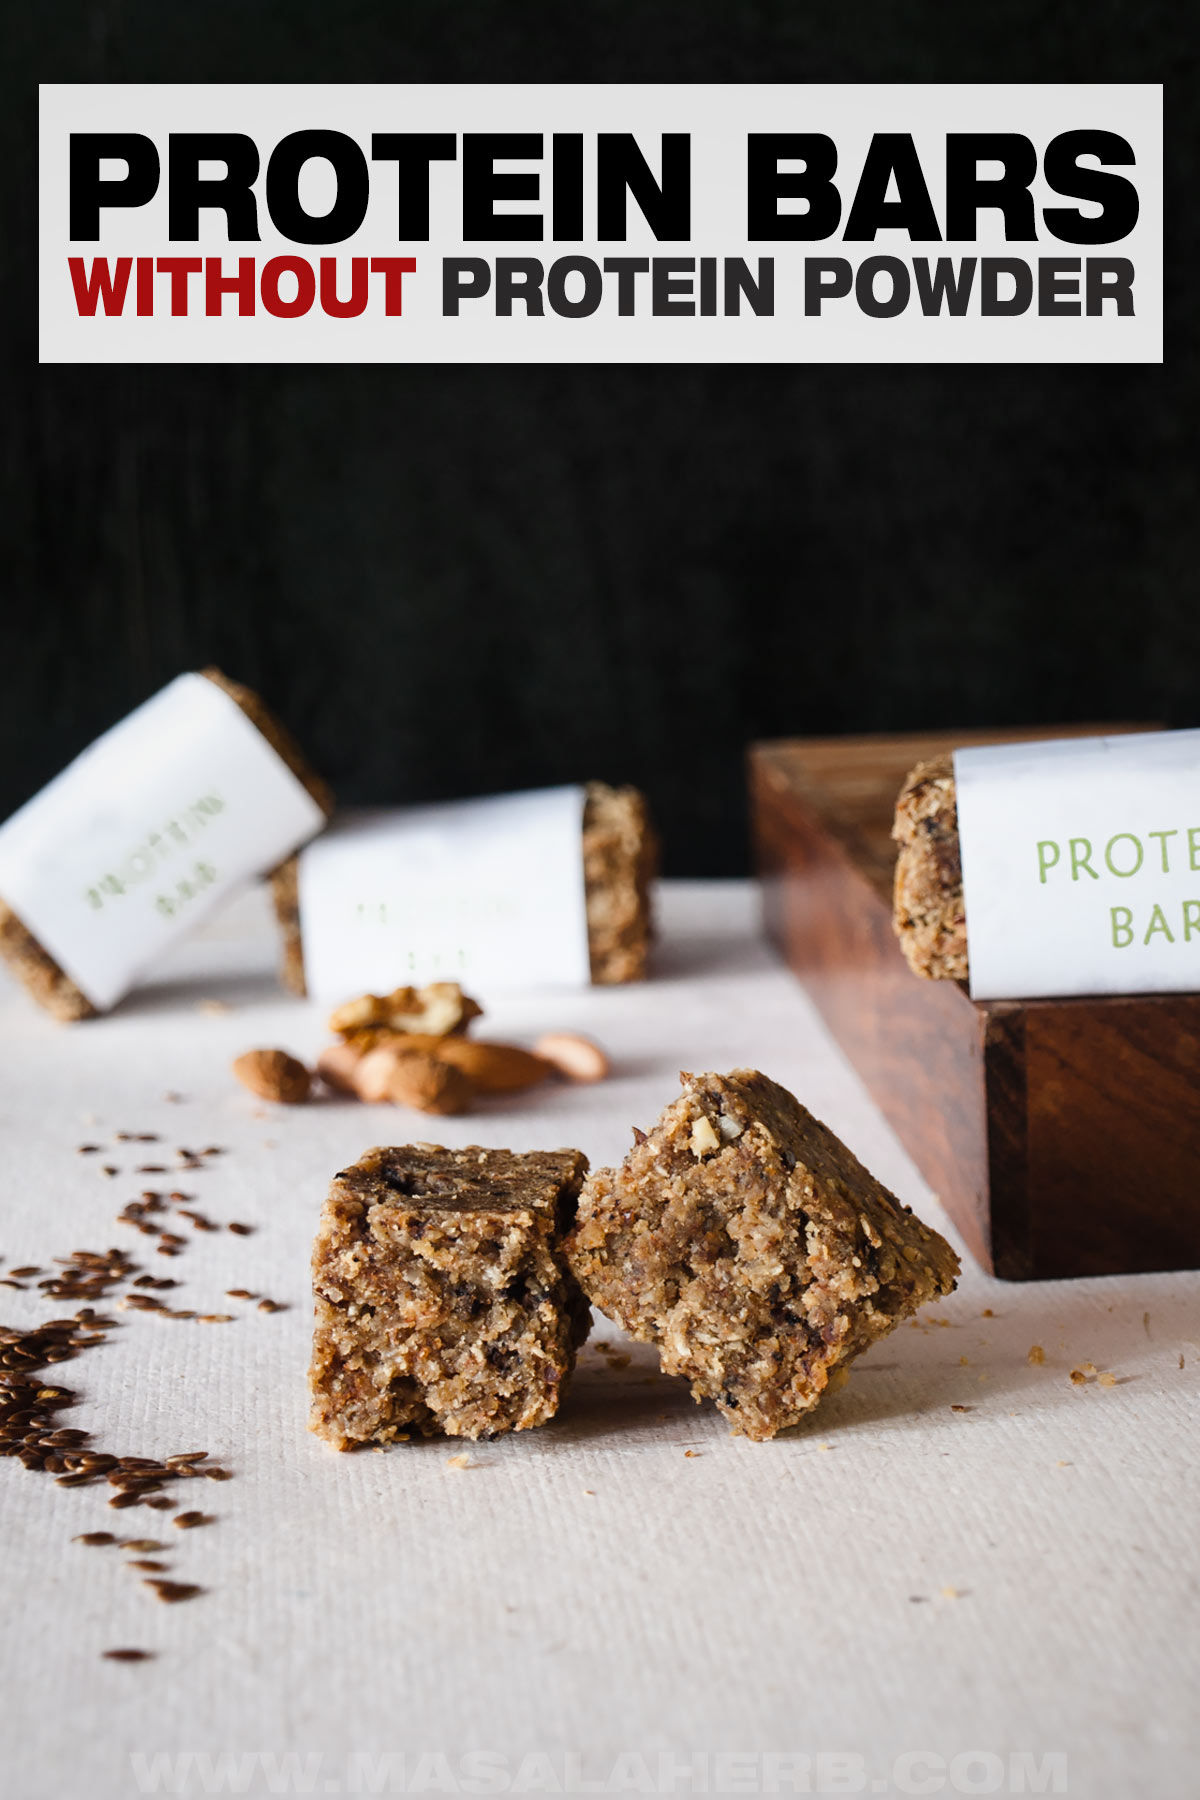 Baked Protein Bars without Protein Powder Recipe cover image